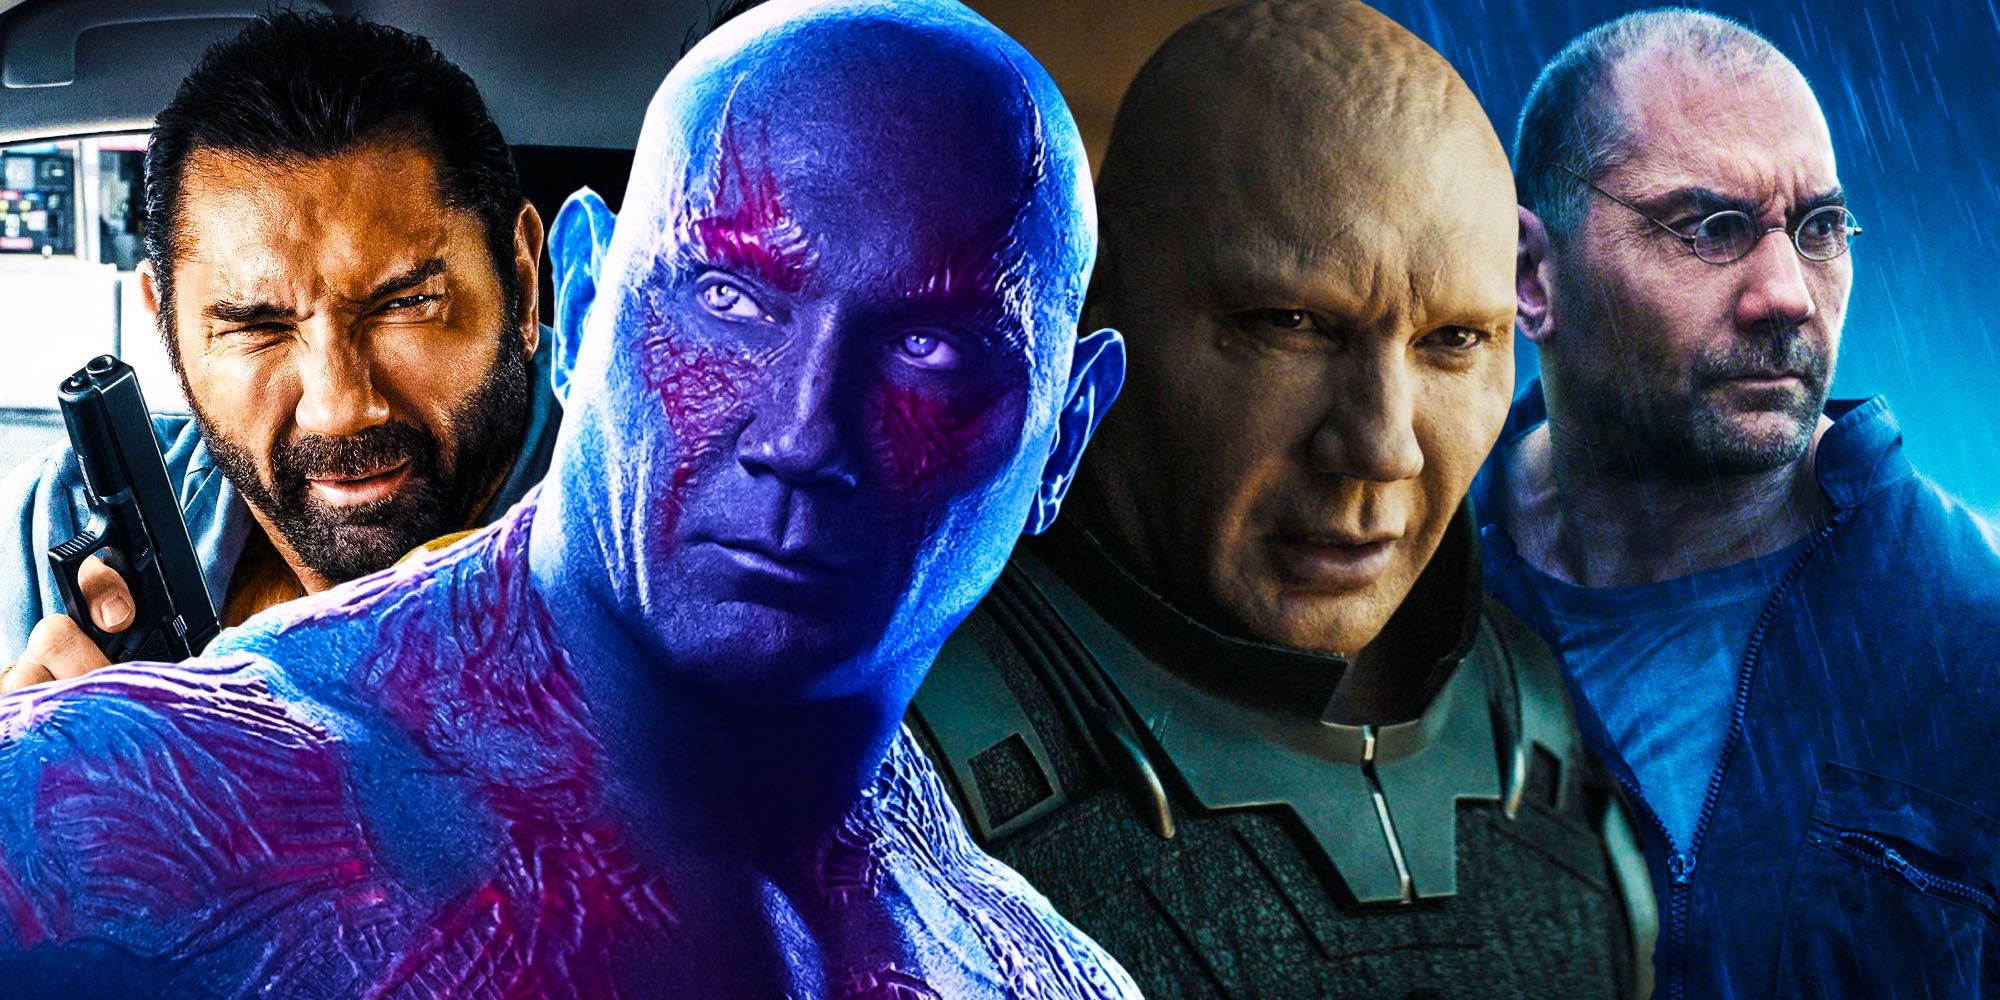 Dave Bautista movies ranked Guardians of the galaxy dune blade runner 2049 stuber